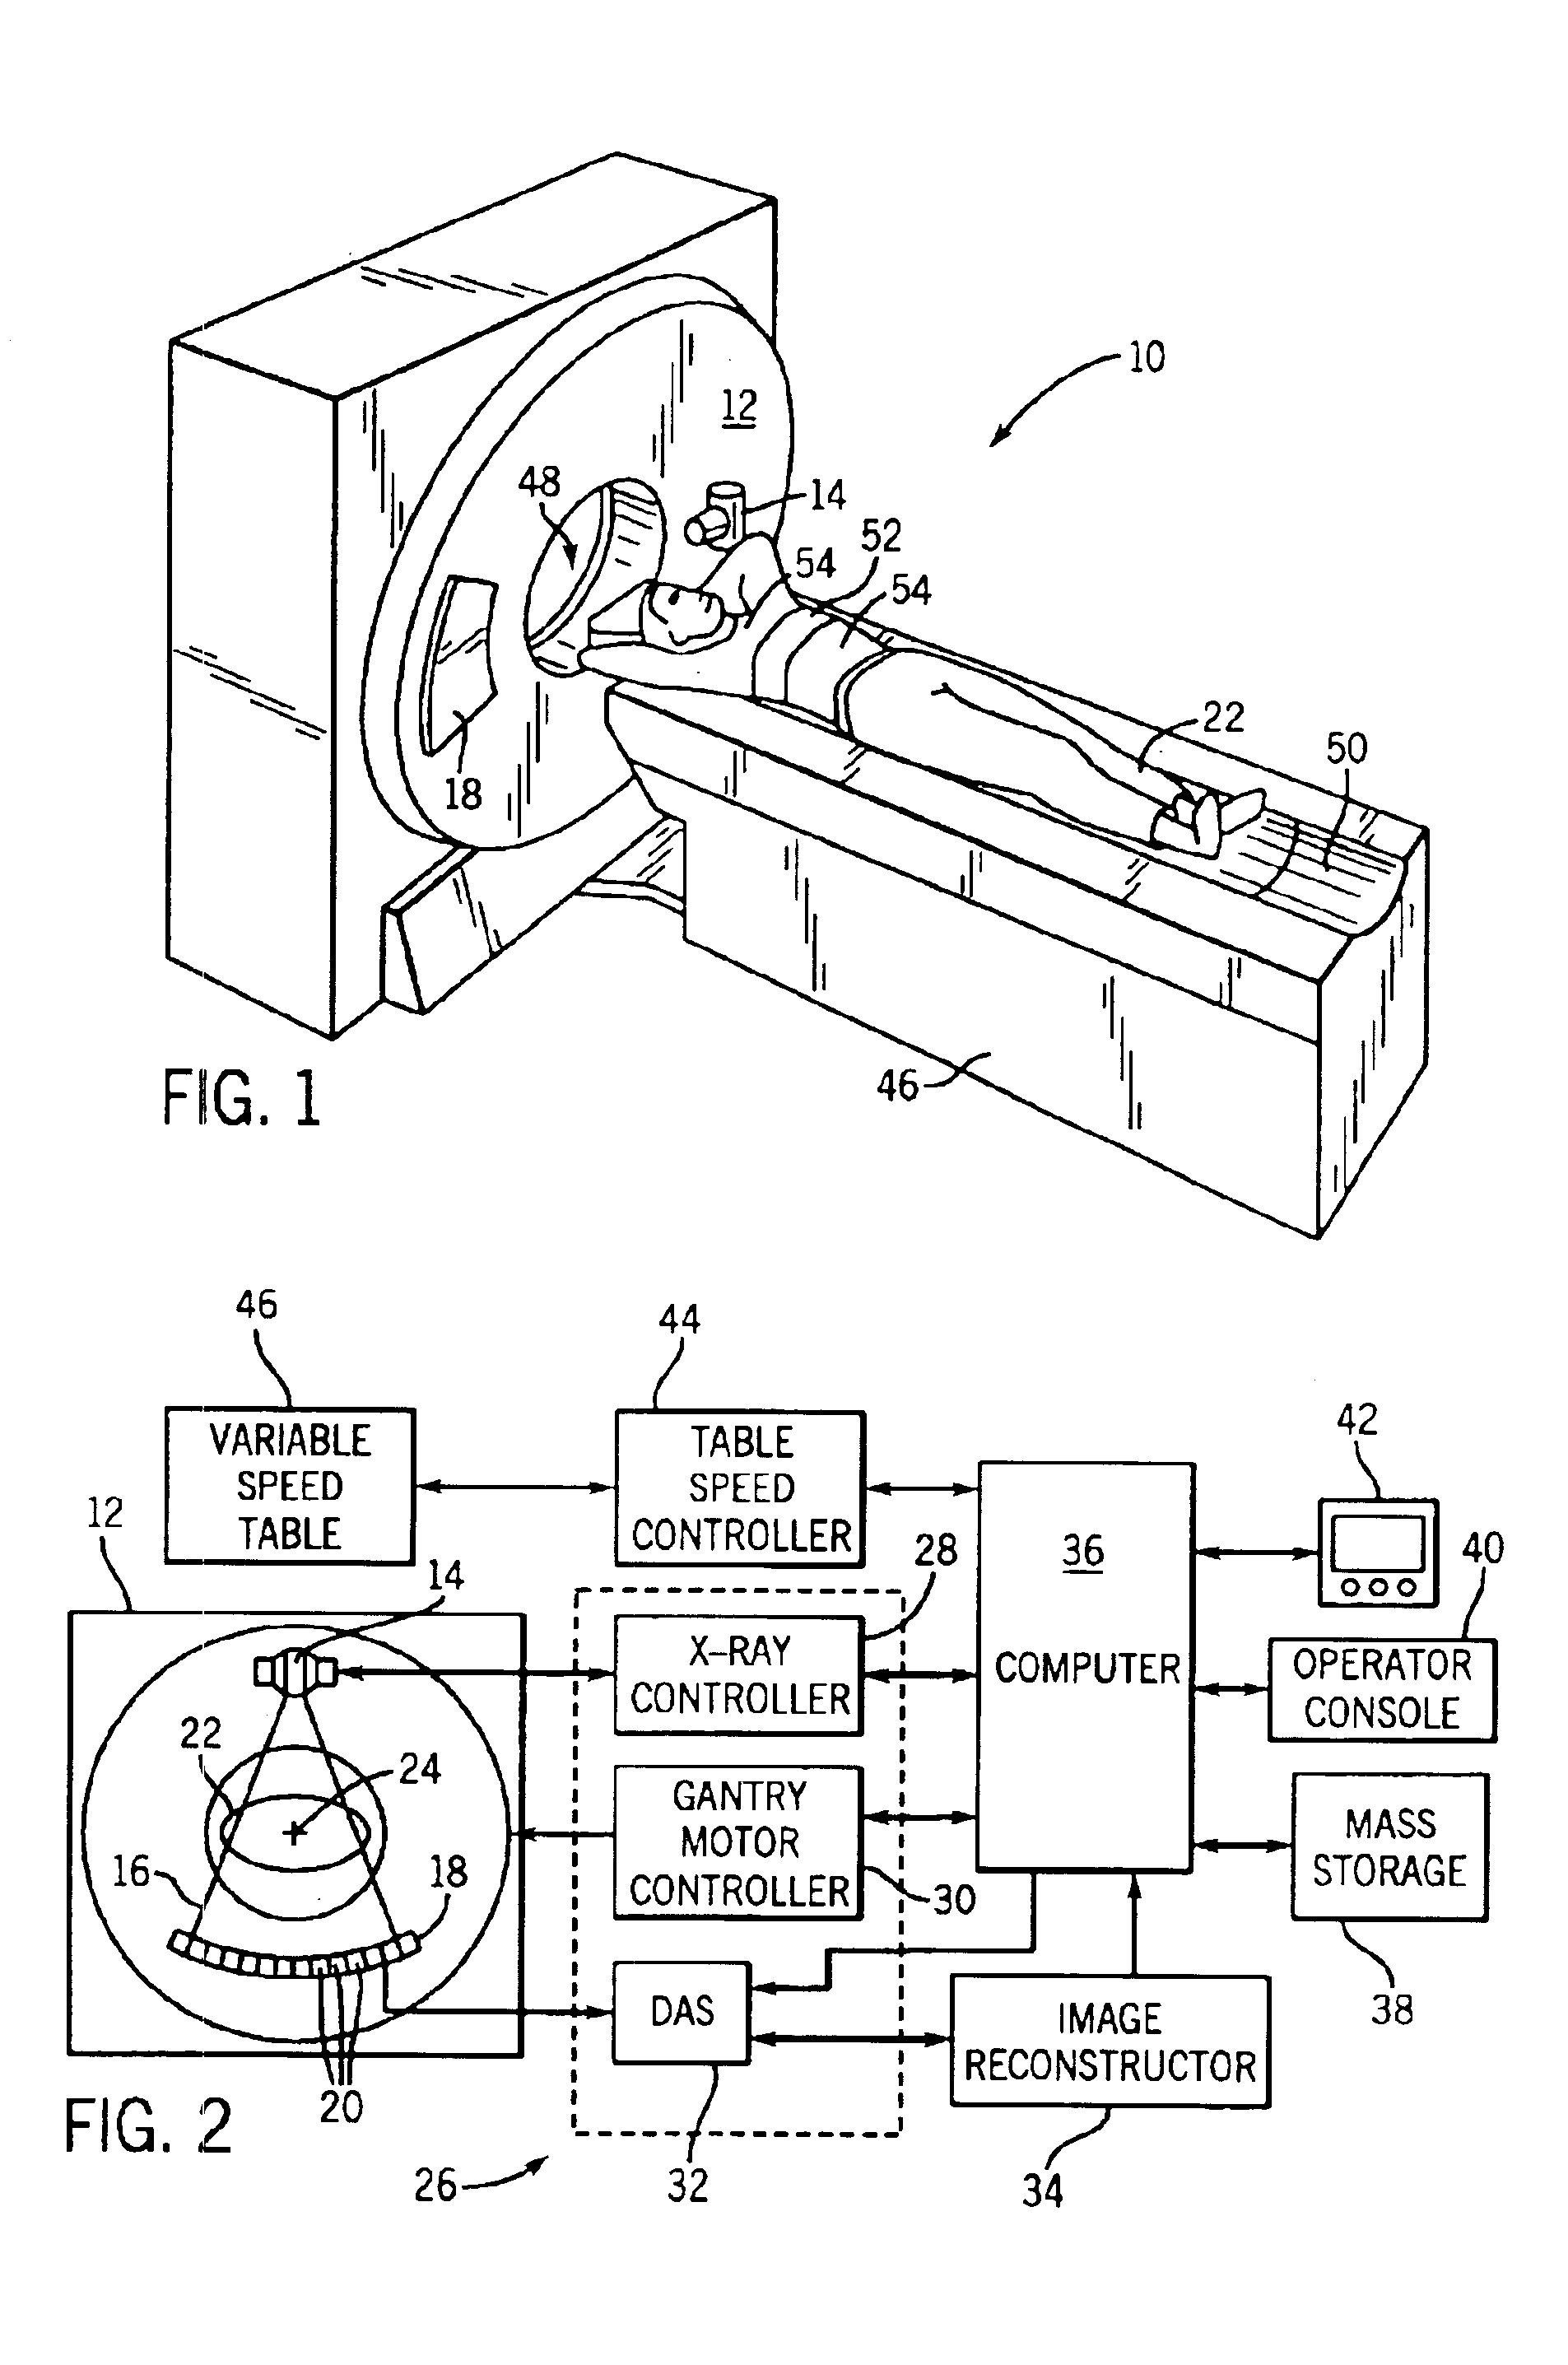 System and method of medical imaging having default noise index override capability